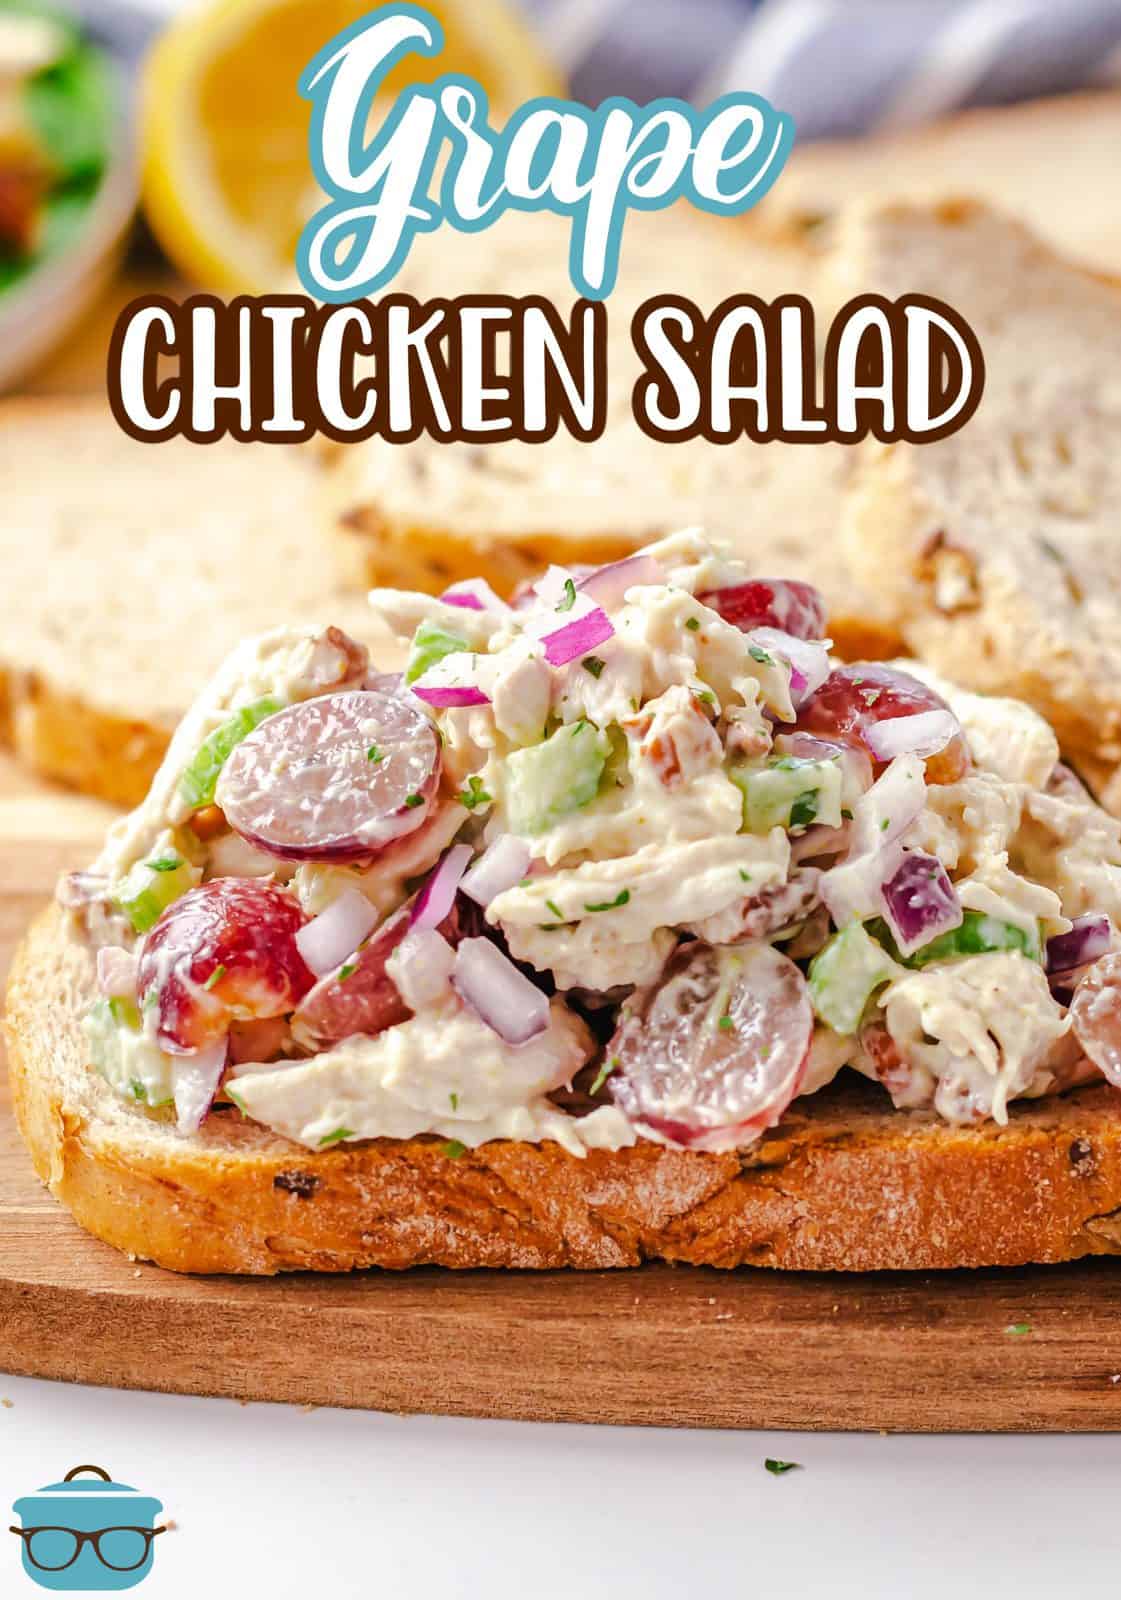 Pinterest image close up of open faced Grape Chicken Salad on bread.